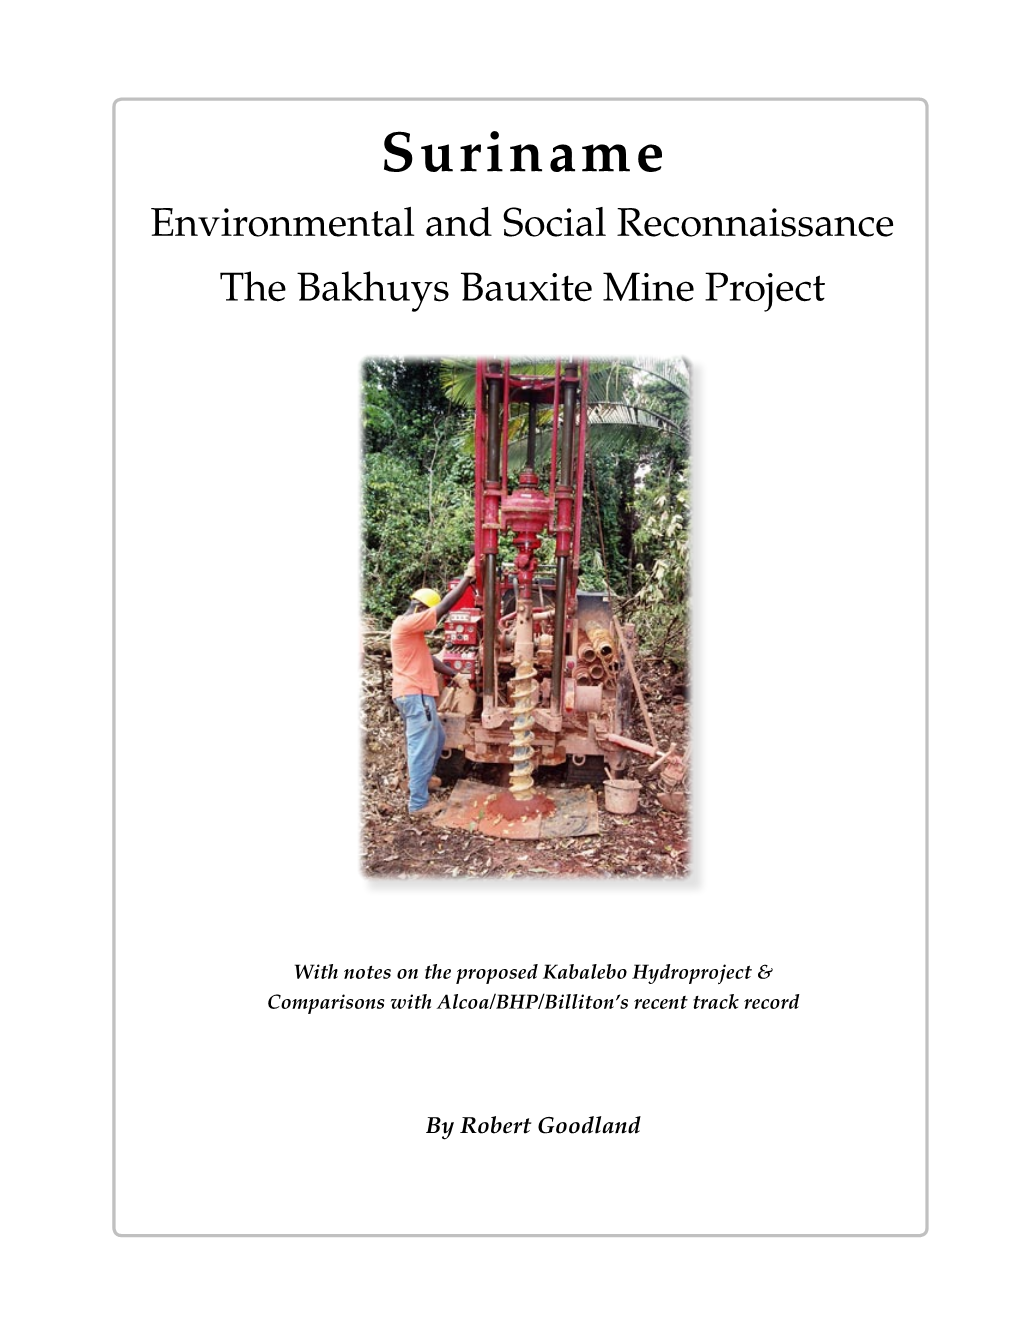 Suriname Environmental and Social Reconnaissance the Bakhuys Bauxite Mine Project